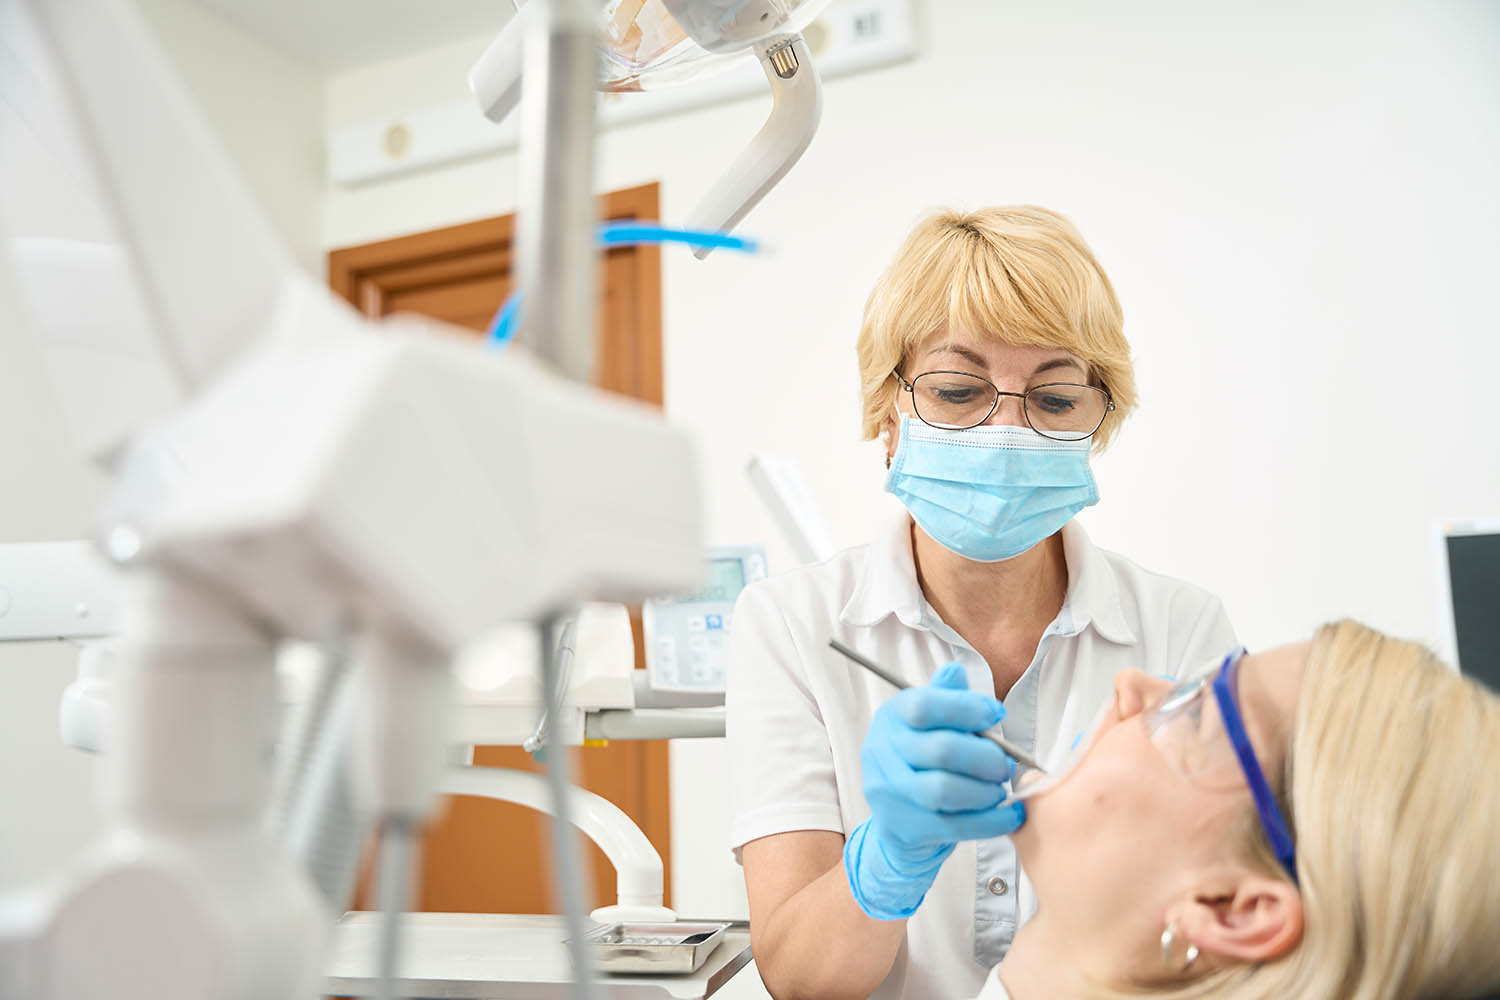 Woman dentist wearing a protective mask treats her teeth